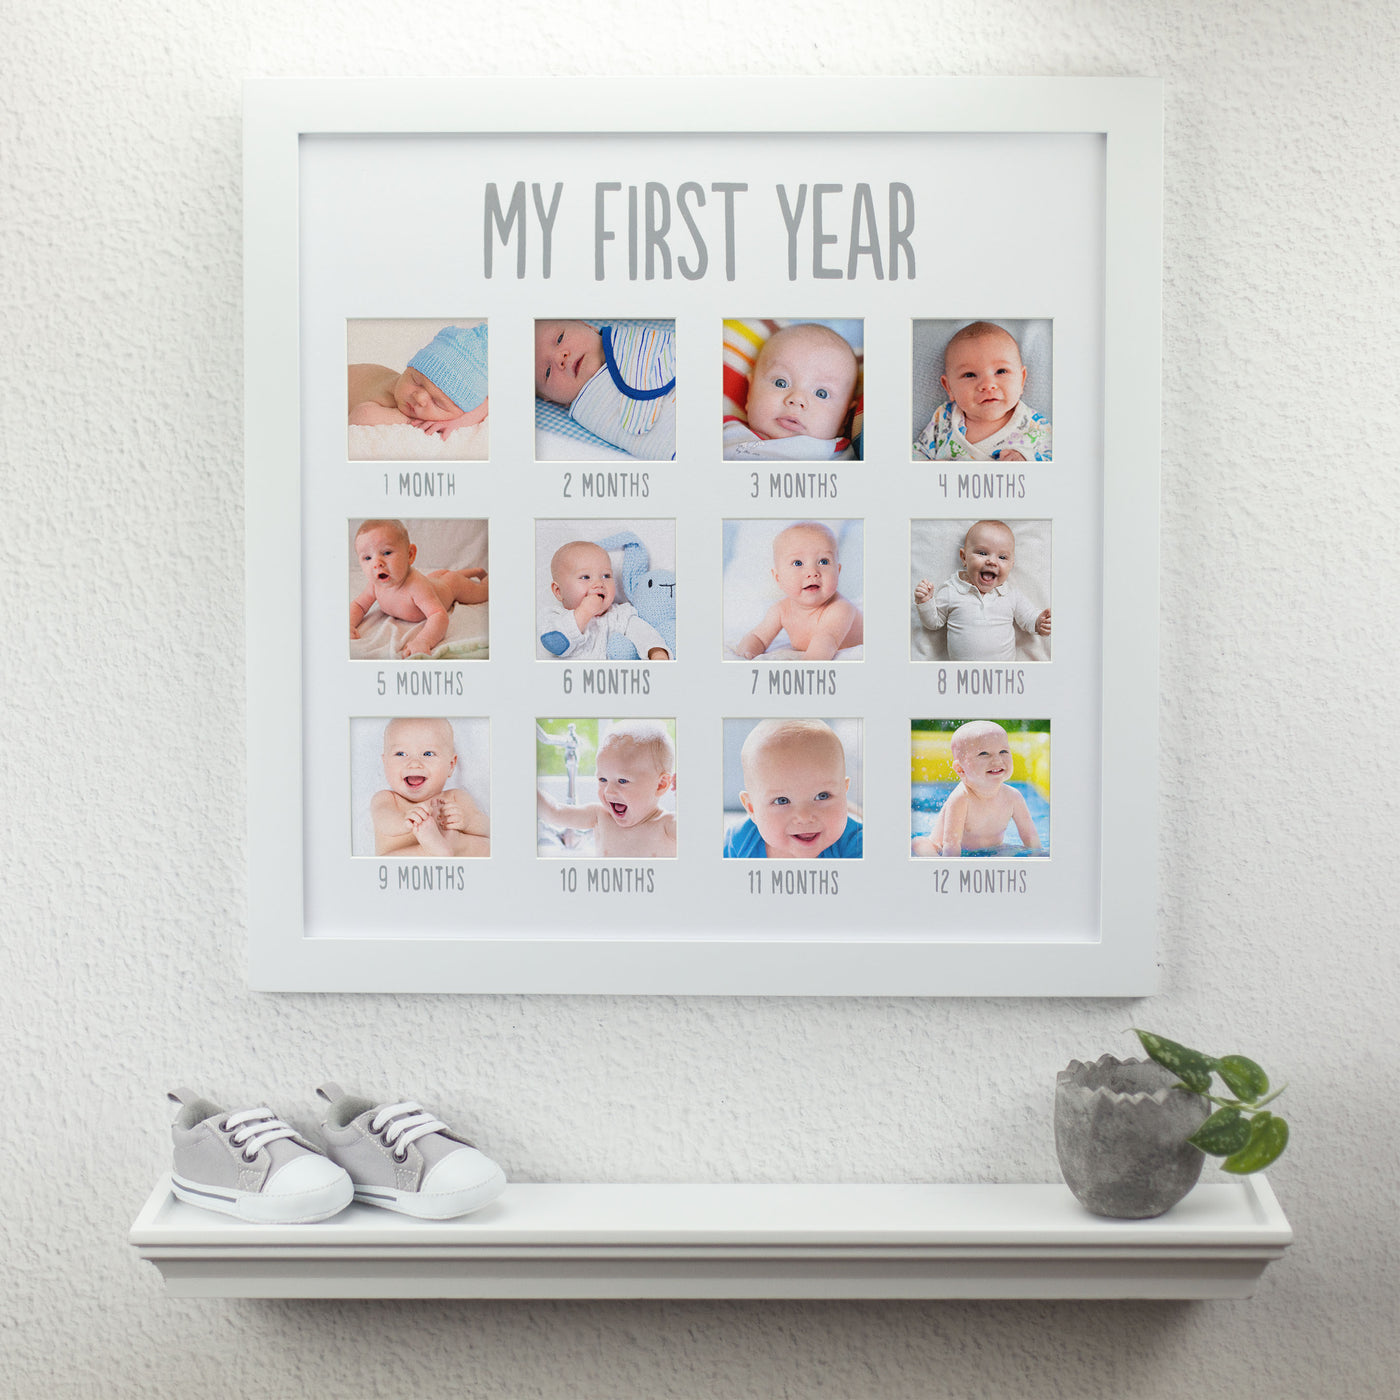 pearhead's first year frame